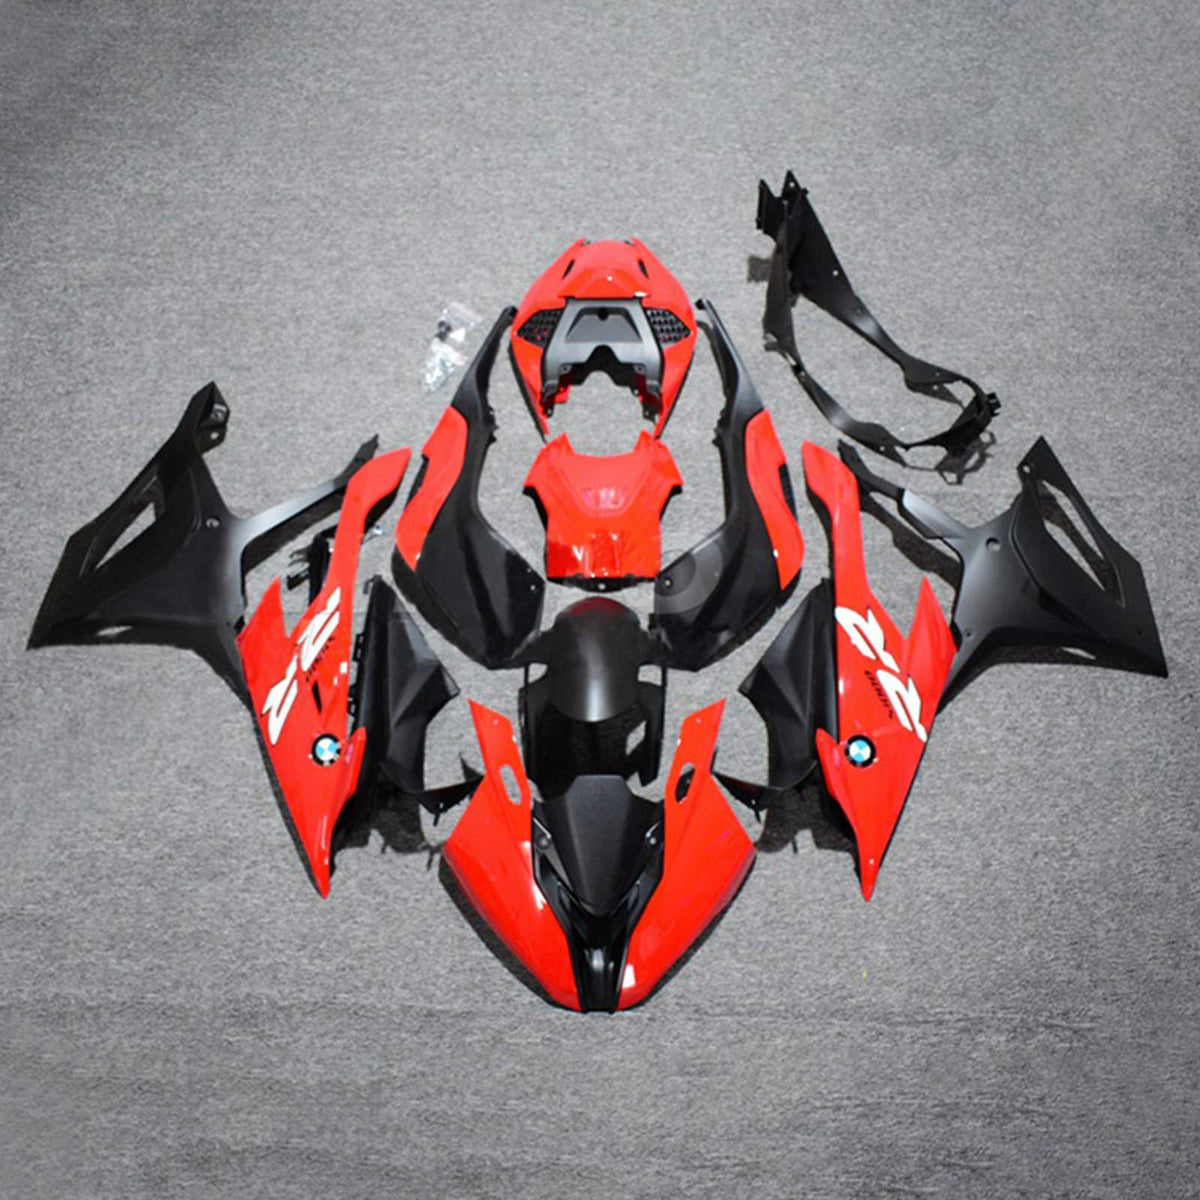 Amotopart 2019-2022 Kit carena racing BMW S1000RR/M1000RR Rosso Nero